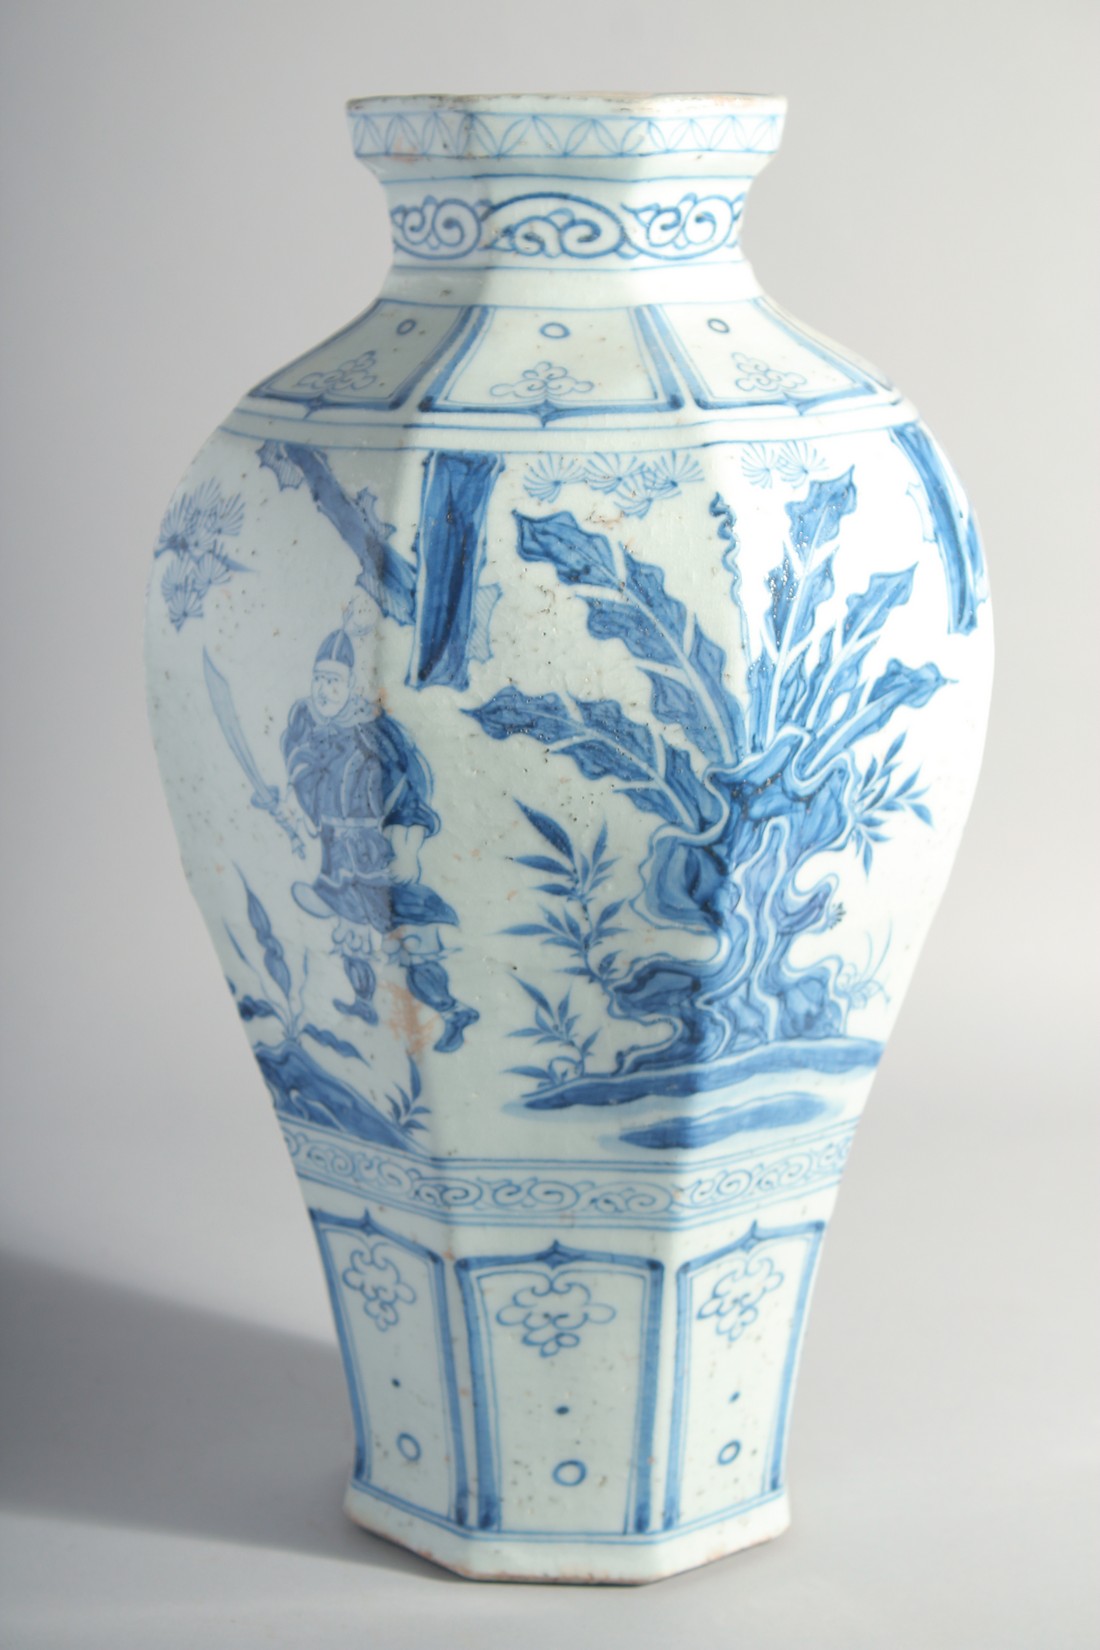 A LARGE CHINESE BLUE AND WHITE GLAZED POTTERY VASE, painted with figures and flora, 42cm high. - Image 3 of 6